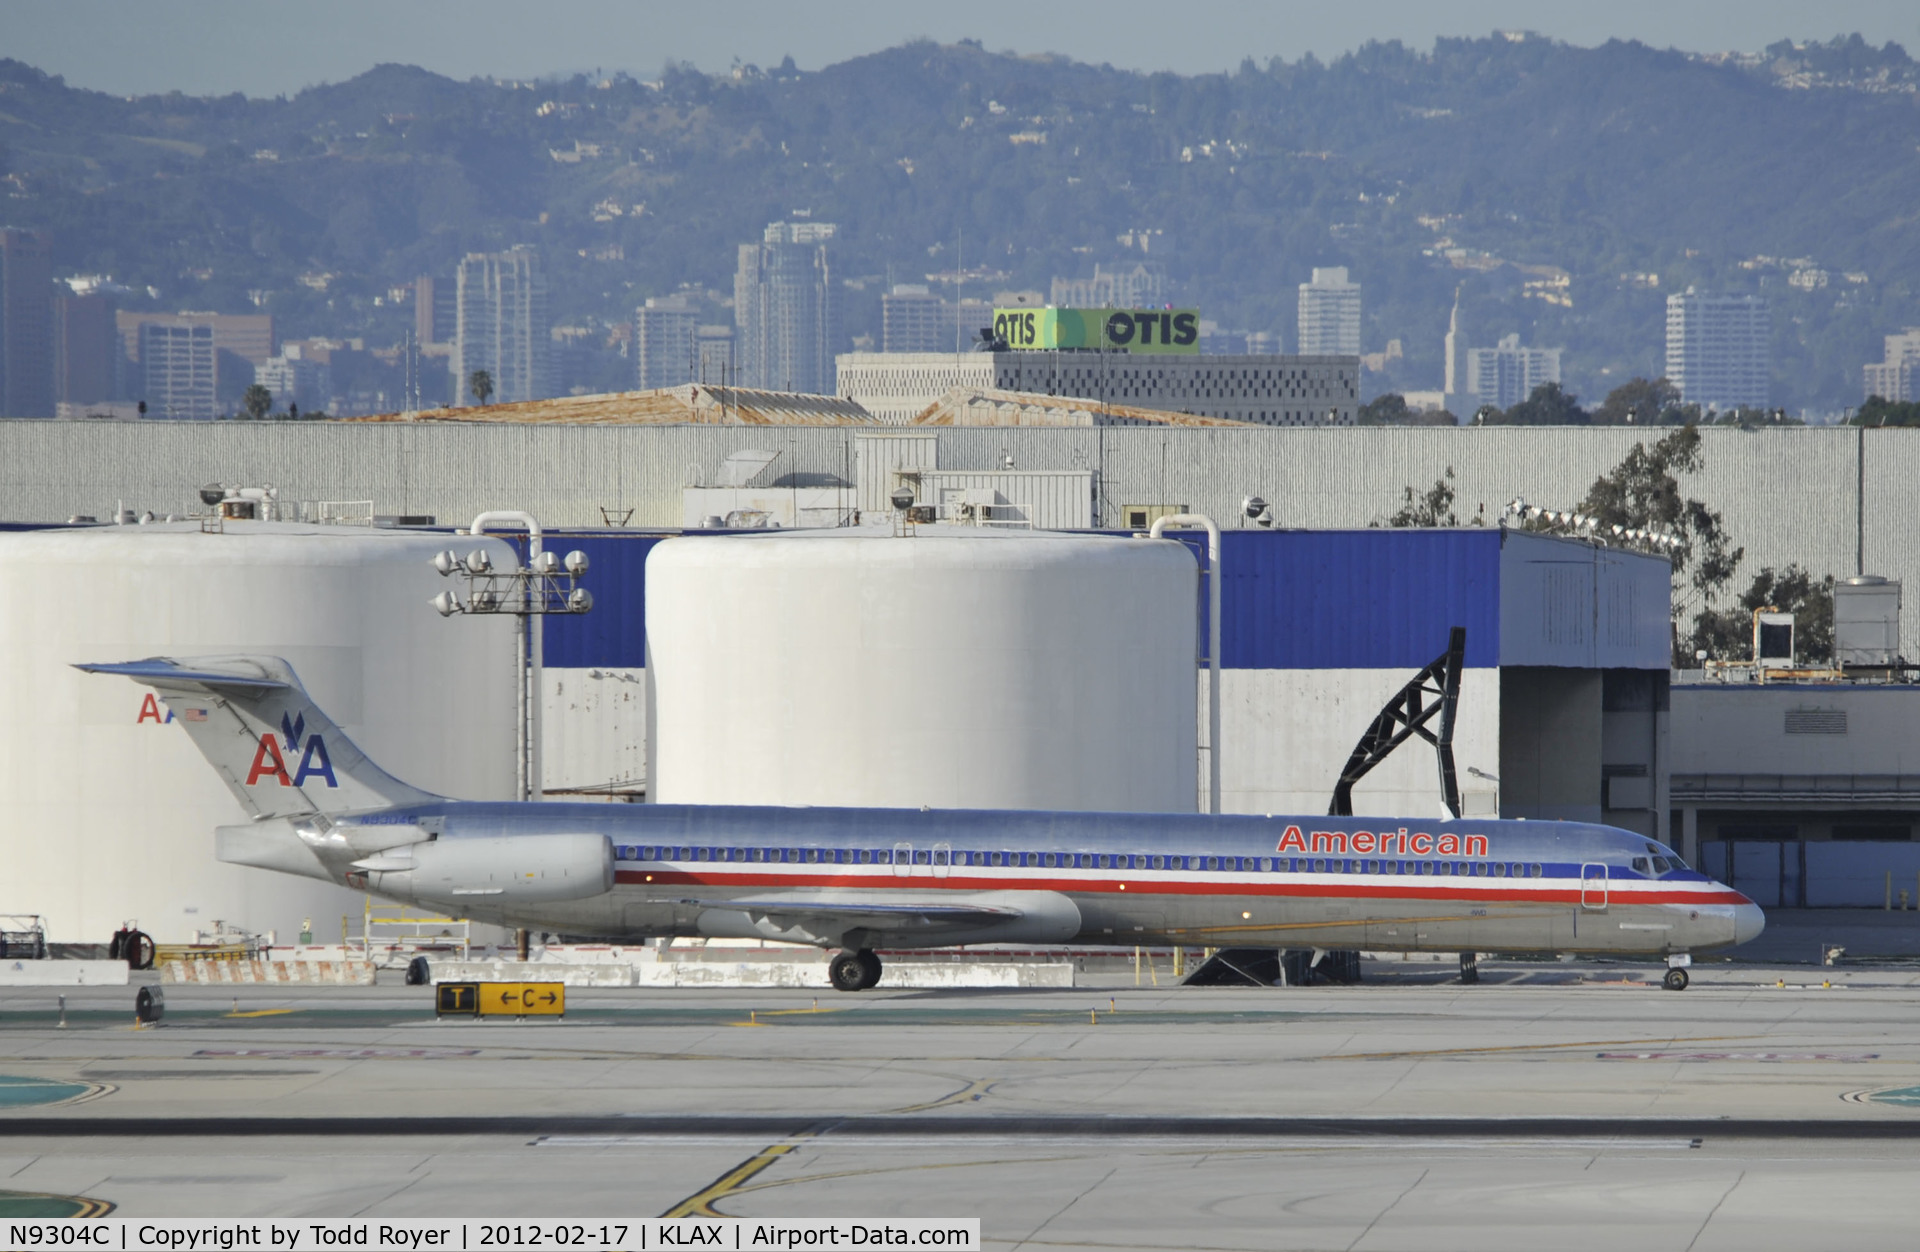 N9304C, 1987 McDonnell Douglas MD-83 (DC-9-83) C/N 49530, Taxiing to gate at LAX